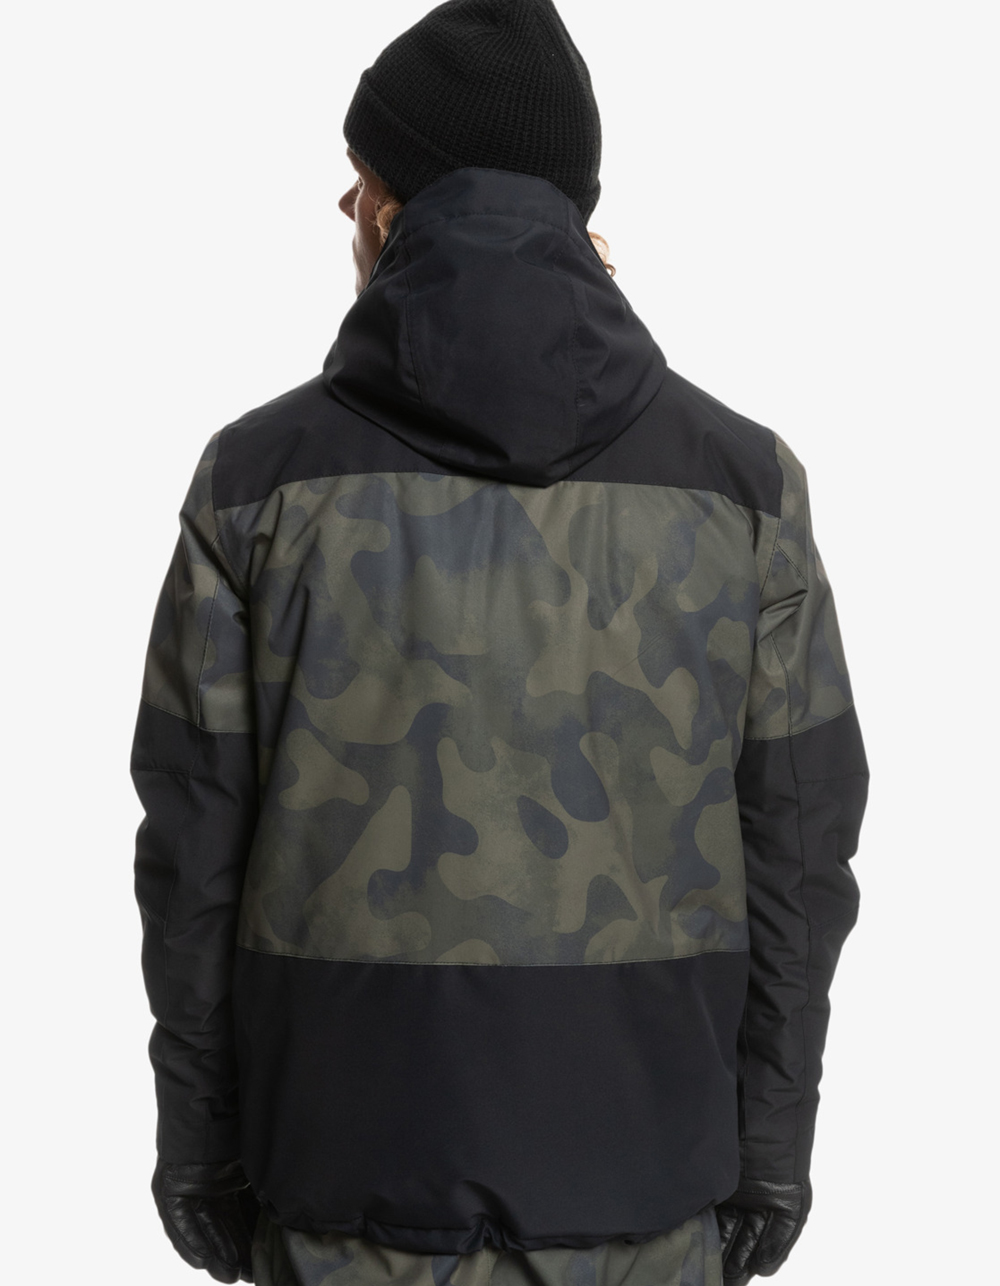 QUIKSILVER Mission Mens Insulated Snow Jacket - BLACK | Tillys